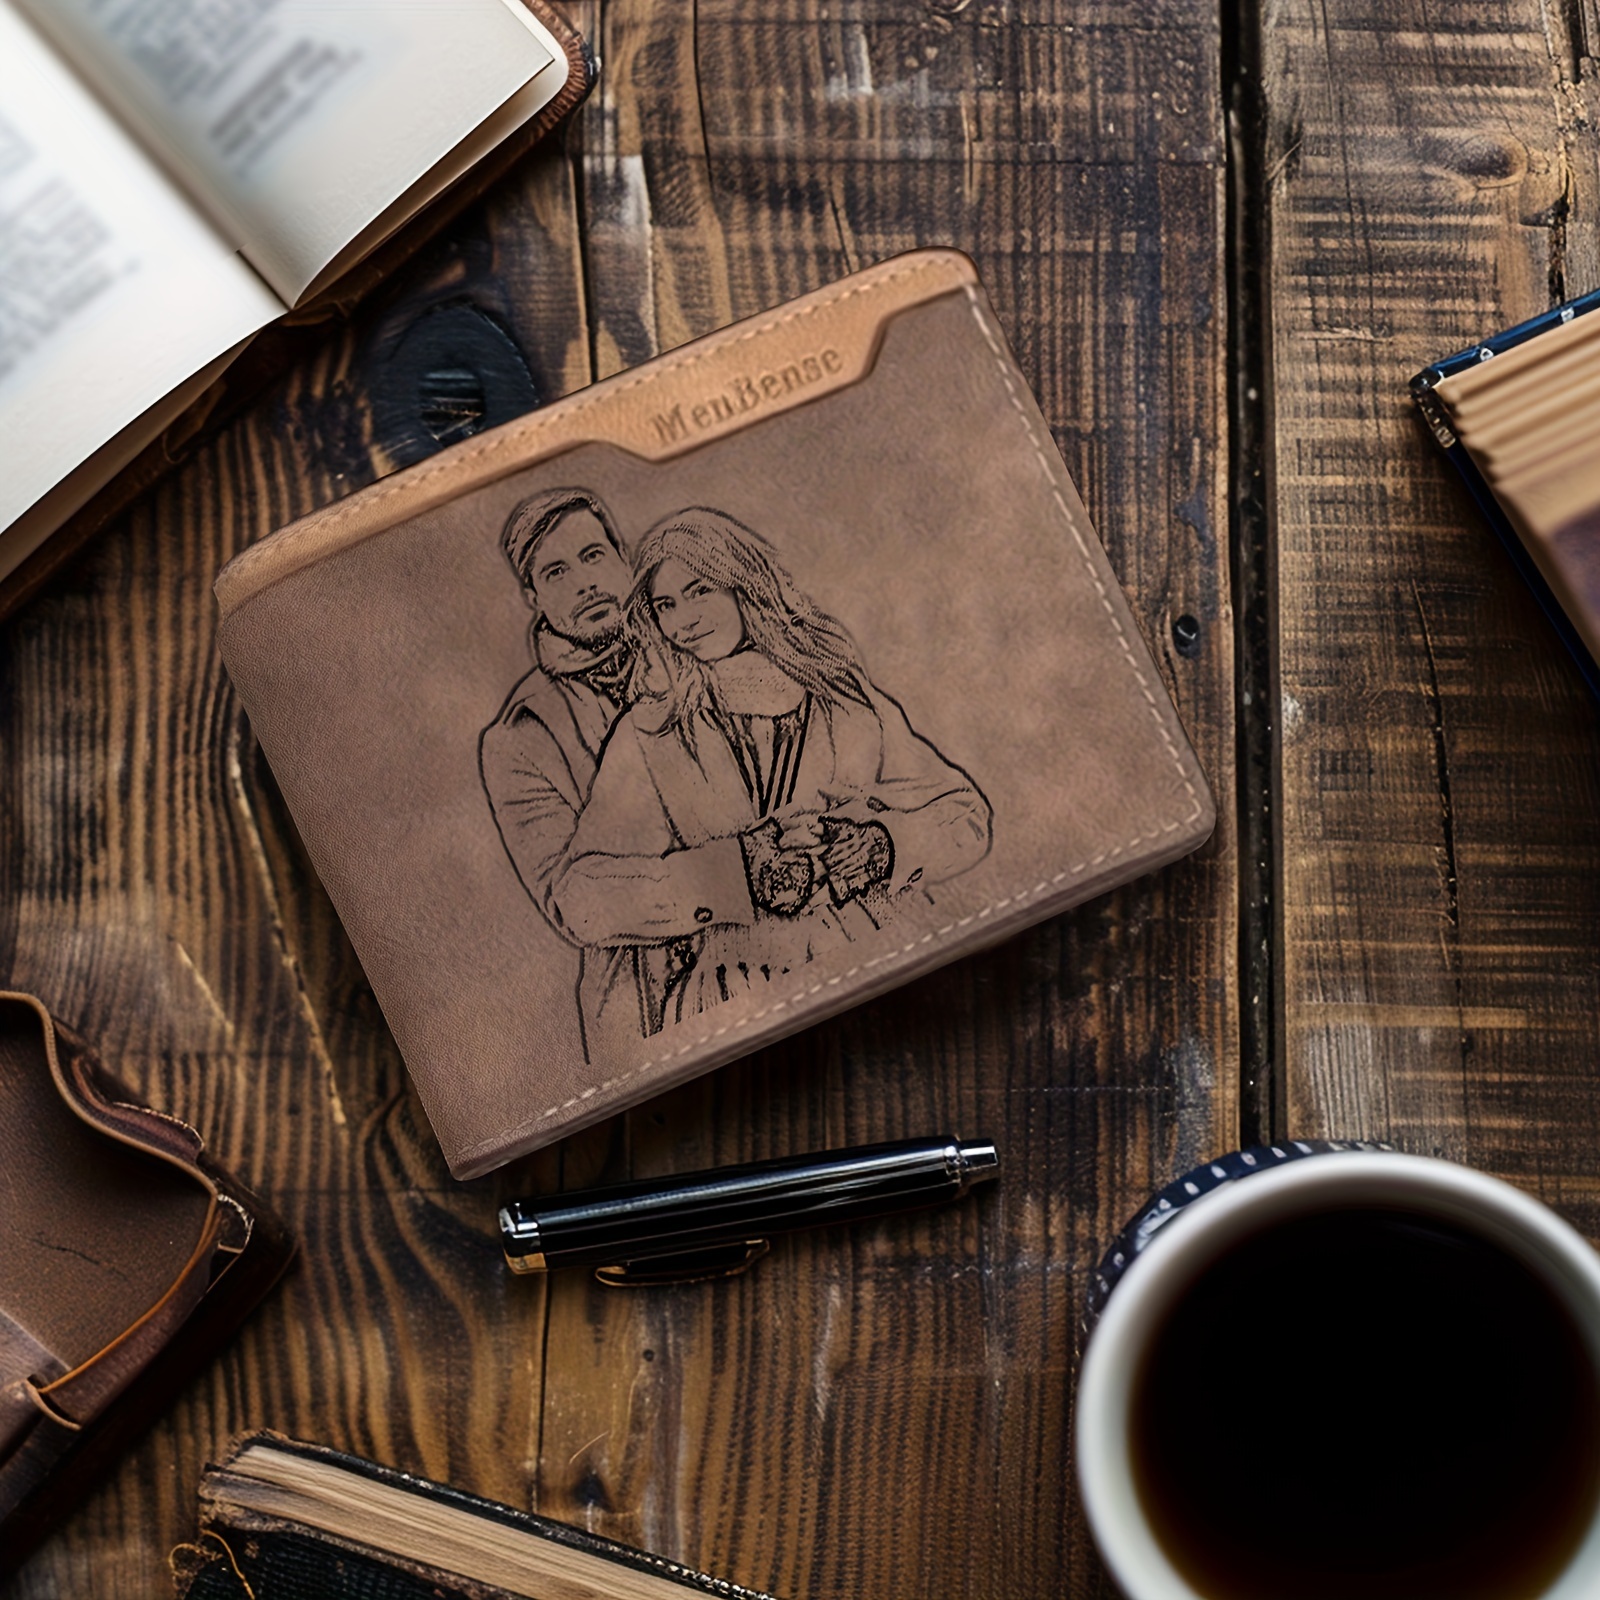 

Faux Leather Wallet, 1pc Men's Customized Wallet, Photo, Personalized Engraving Picture And Name, Customized Wallet For Dad, Father's Day Gift, Anniversary Gift For Boyfriend